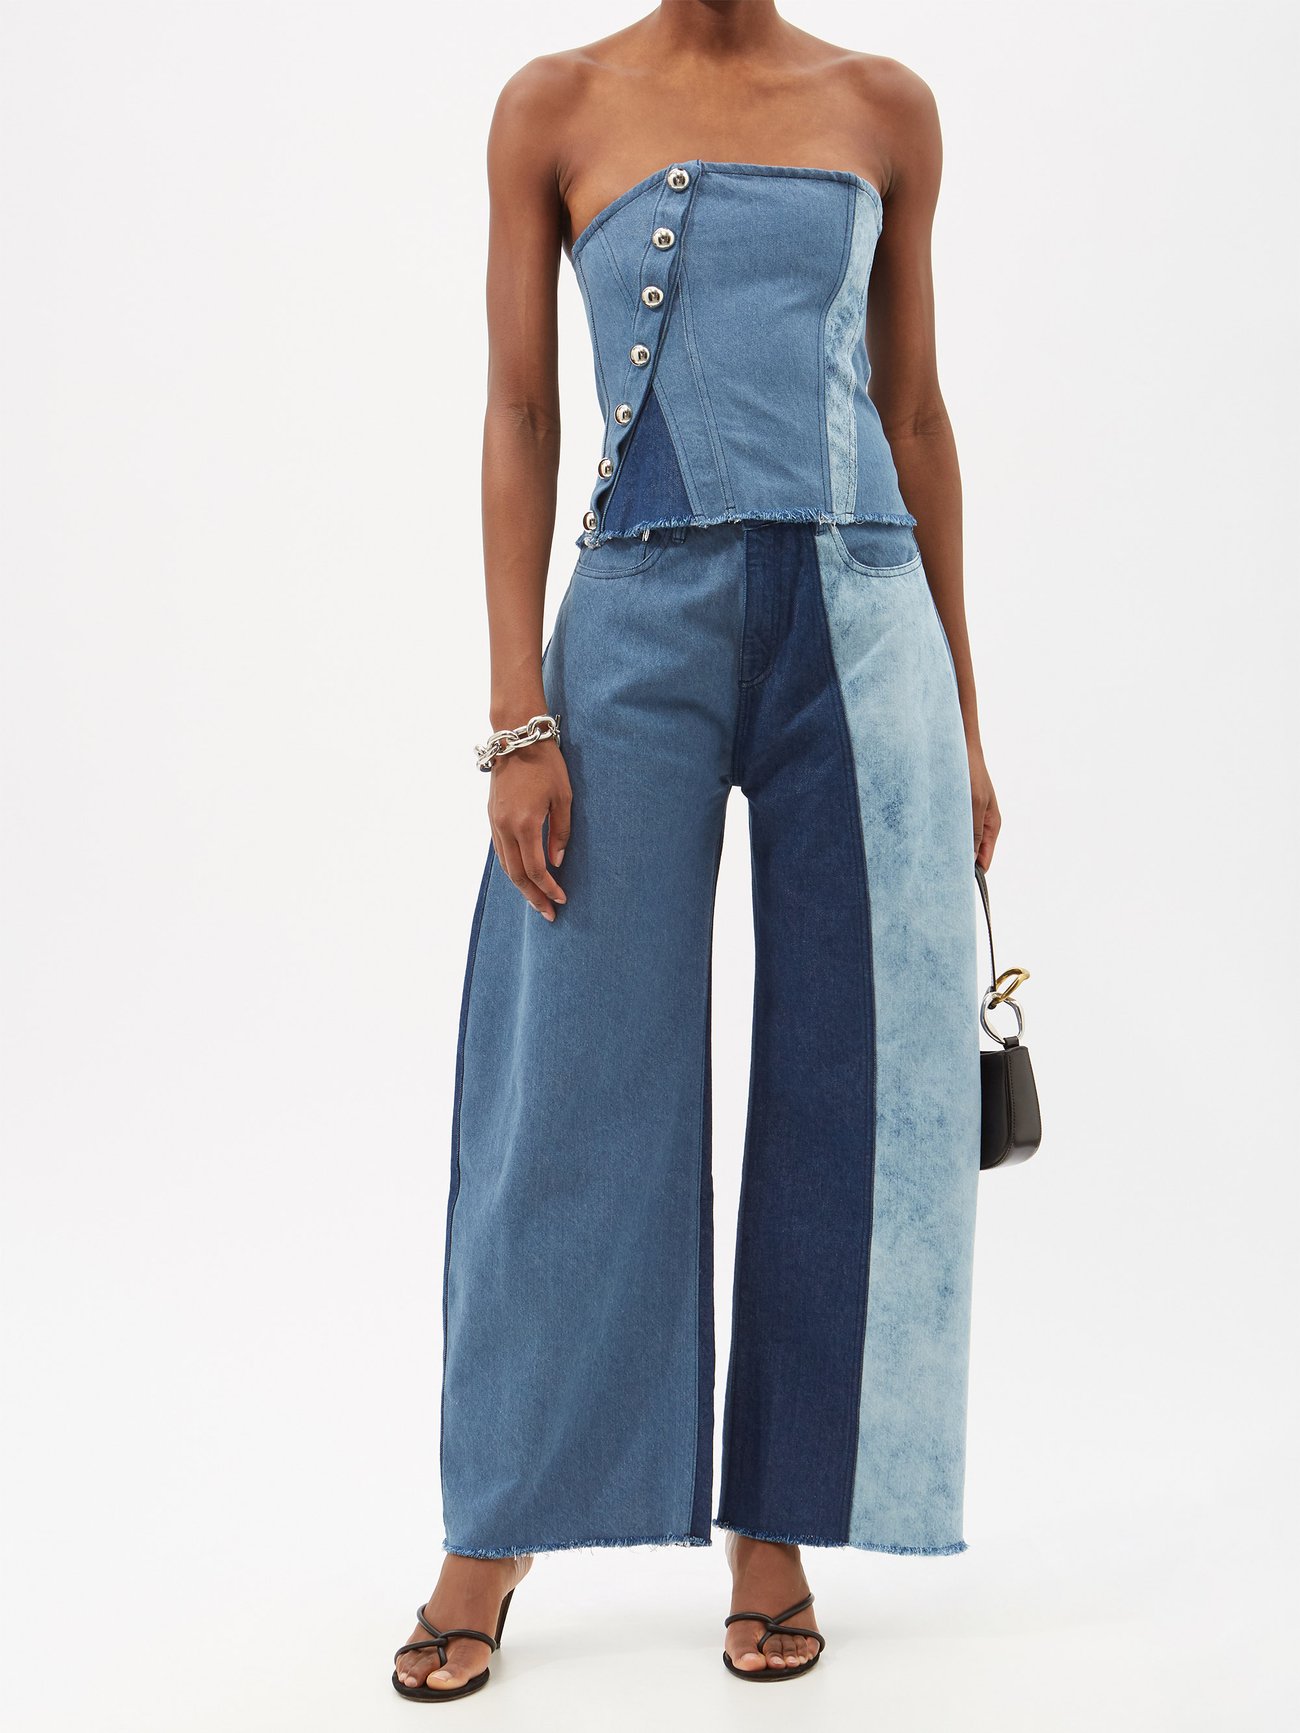 Blue Patchwork recycled-denim strapless top, Marques'Almeida